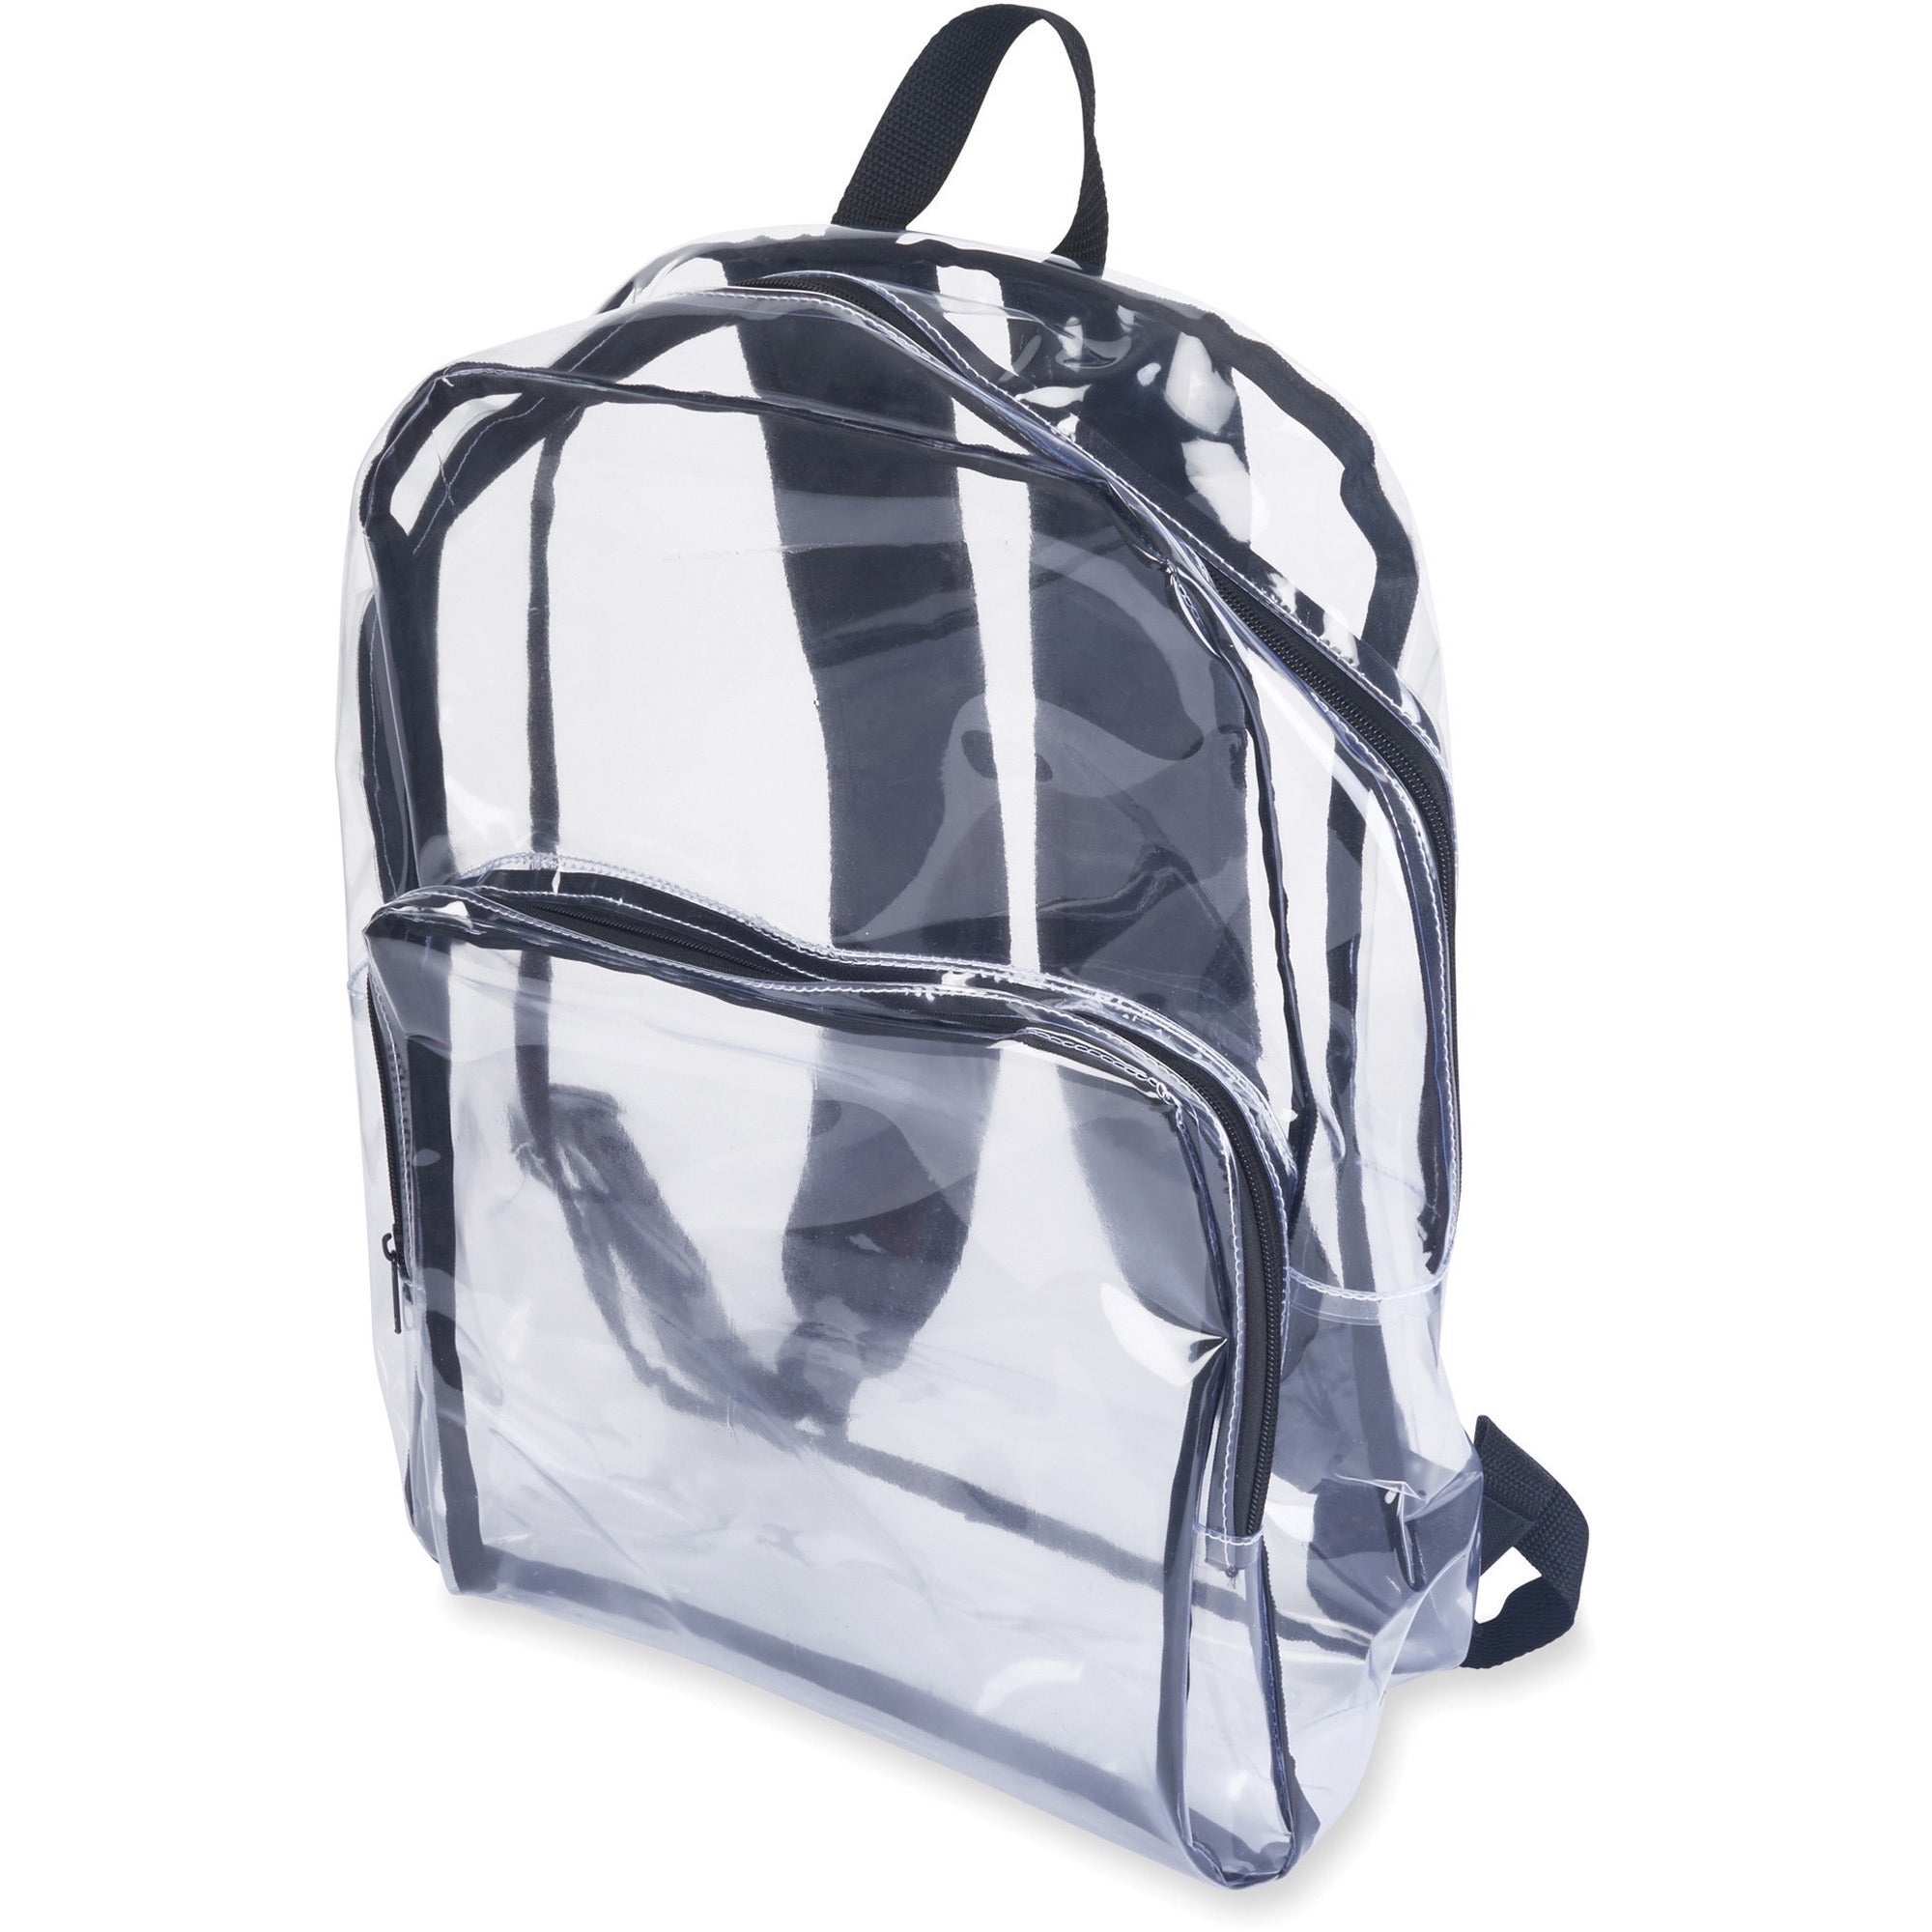 tatco-carrying-case-backpack-notebook-clear-black-vinyl-body-shoulder-strap-175-height-x-143-width-x-55-depth-1-each_tco63225 - 2